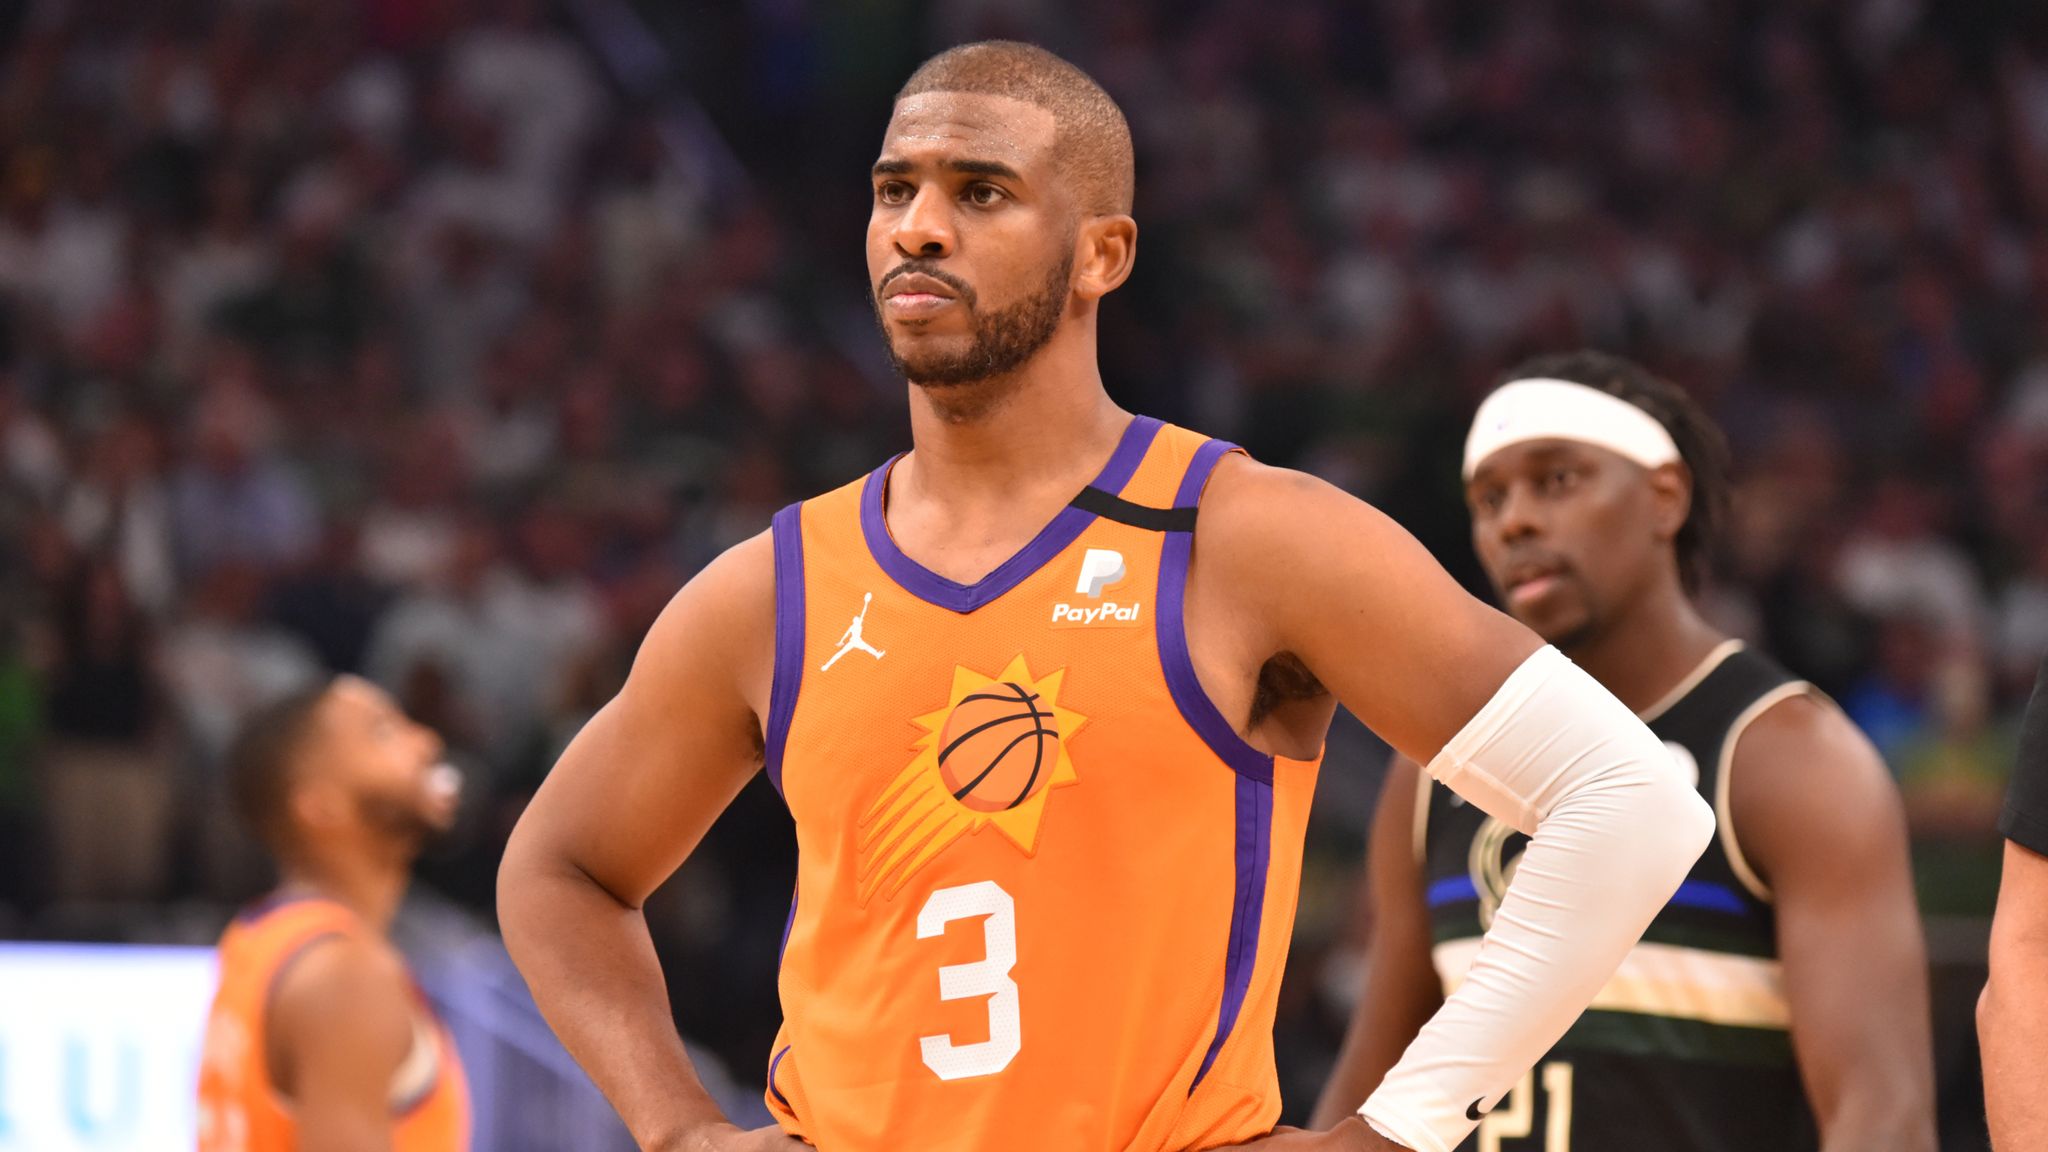 Phoenix Suns 'Fun Facts': 'Can't Give Up Now' song inspires Chris Paul